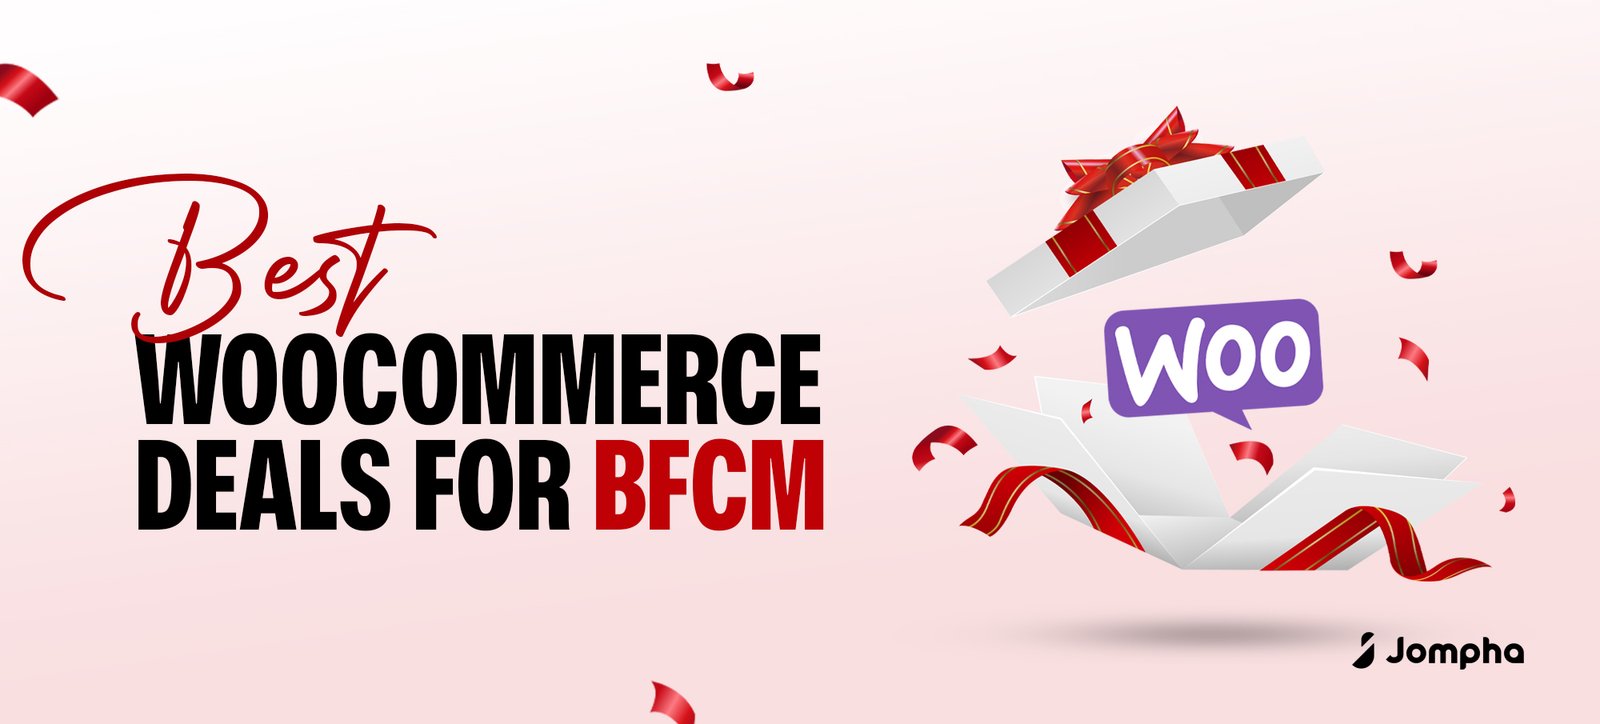 Best WooCommerce deals for BFCM